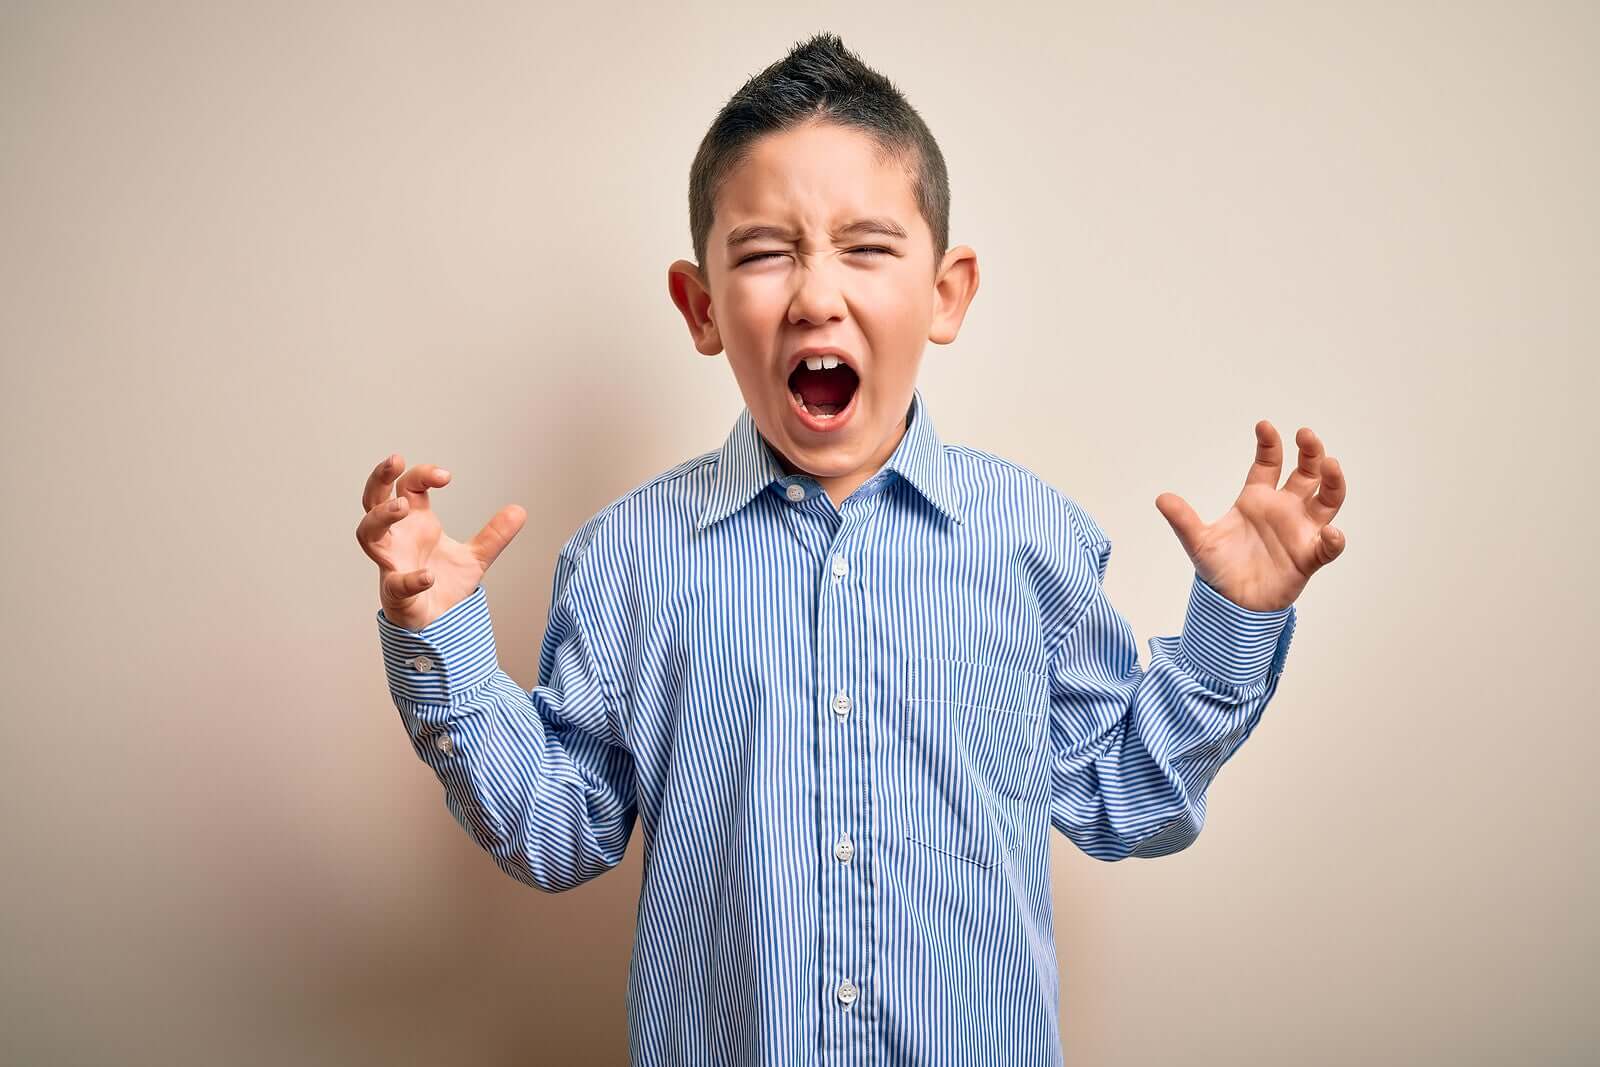 6 Useful Strategies for Managing Anger in Children